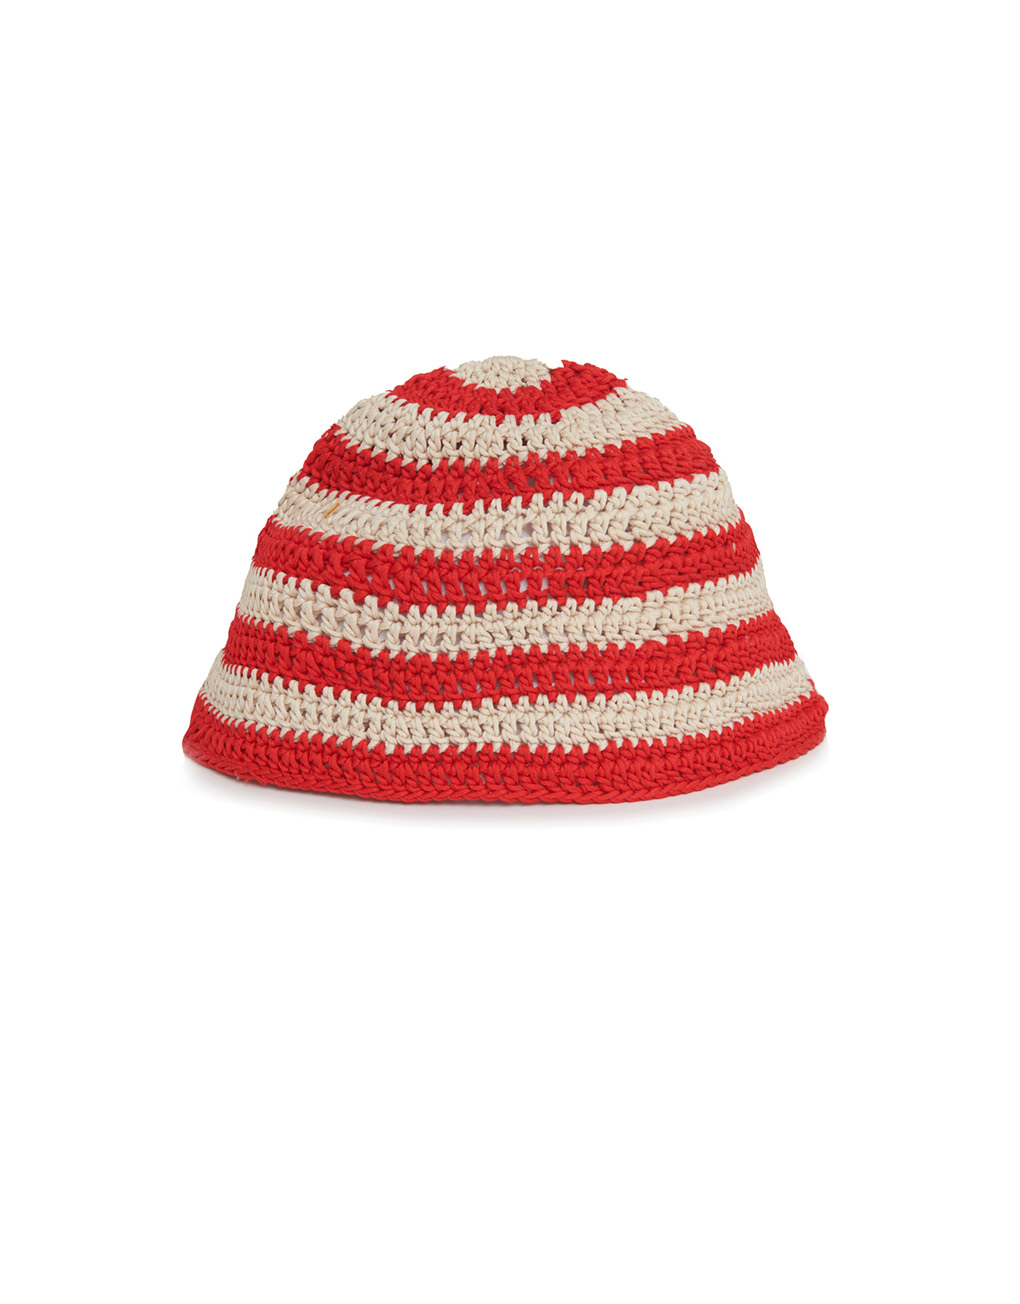 AMISH – Bucket hat hand knitted stripe